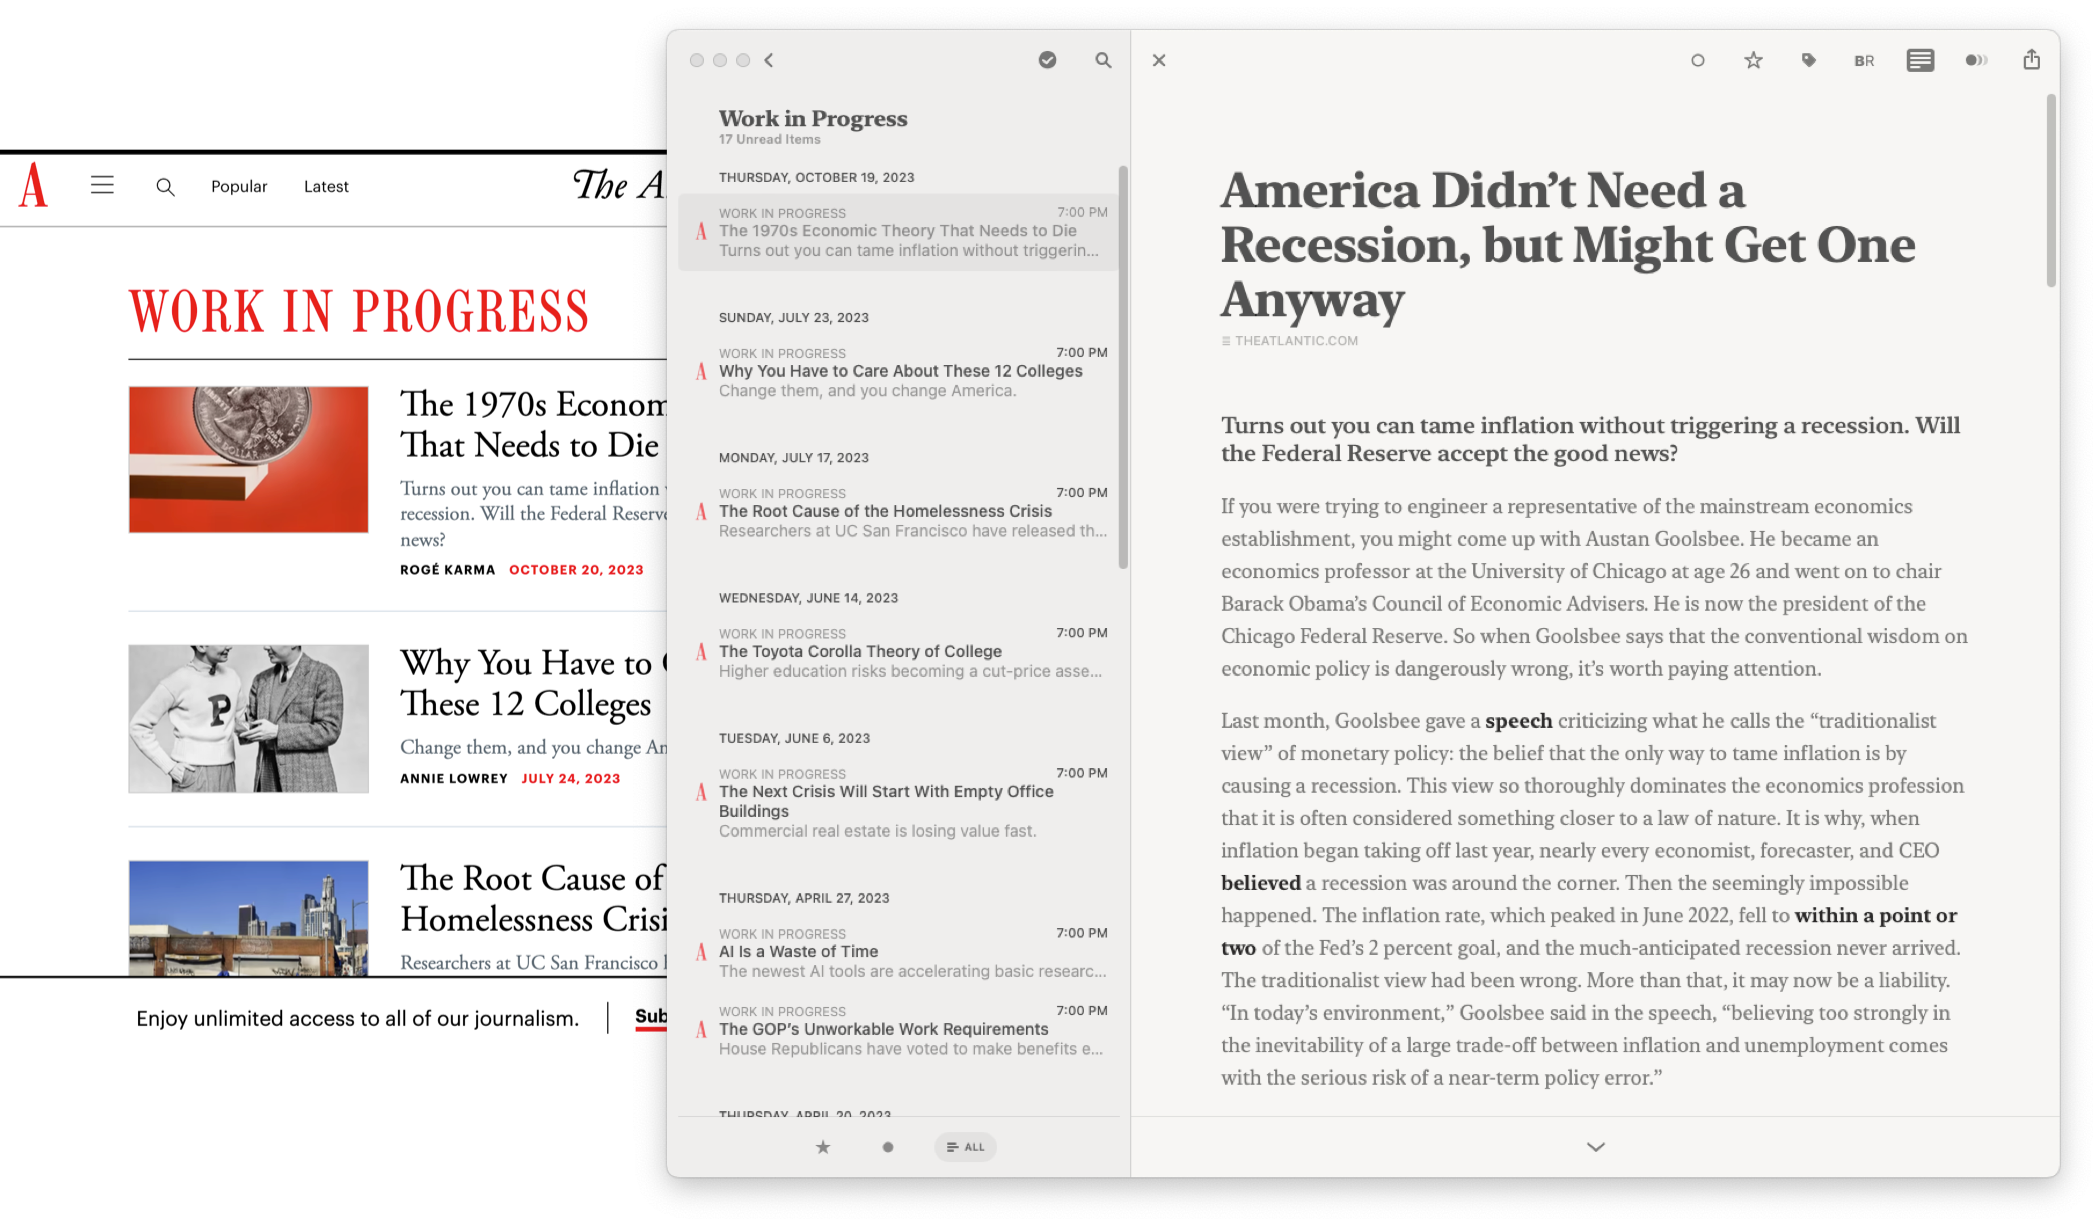 Screenshot of theatlantic.com's Work in Progress category page in the background of another screenshot. The foreground screenshot is of the Reeder app opened to the Work in Progress section. The same feed of news articles can be observed on both screenshots.